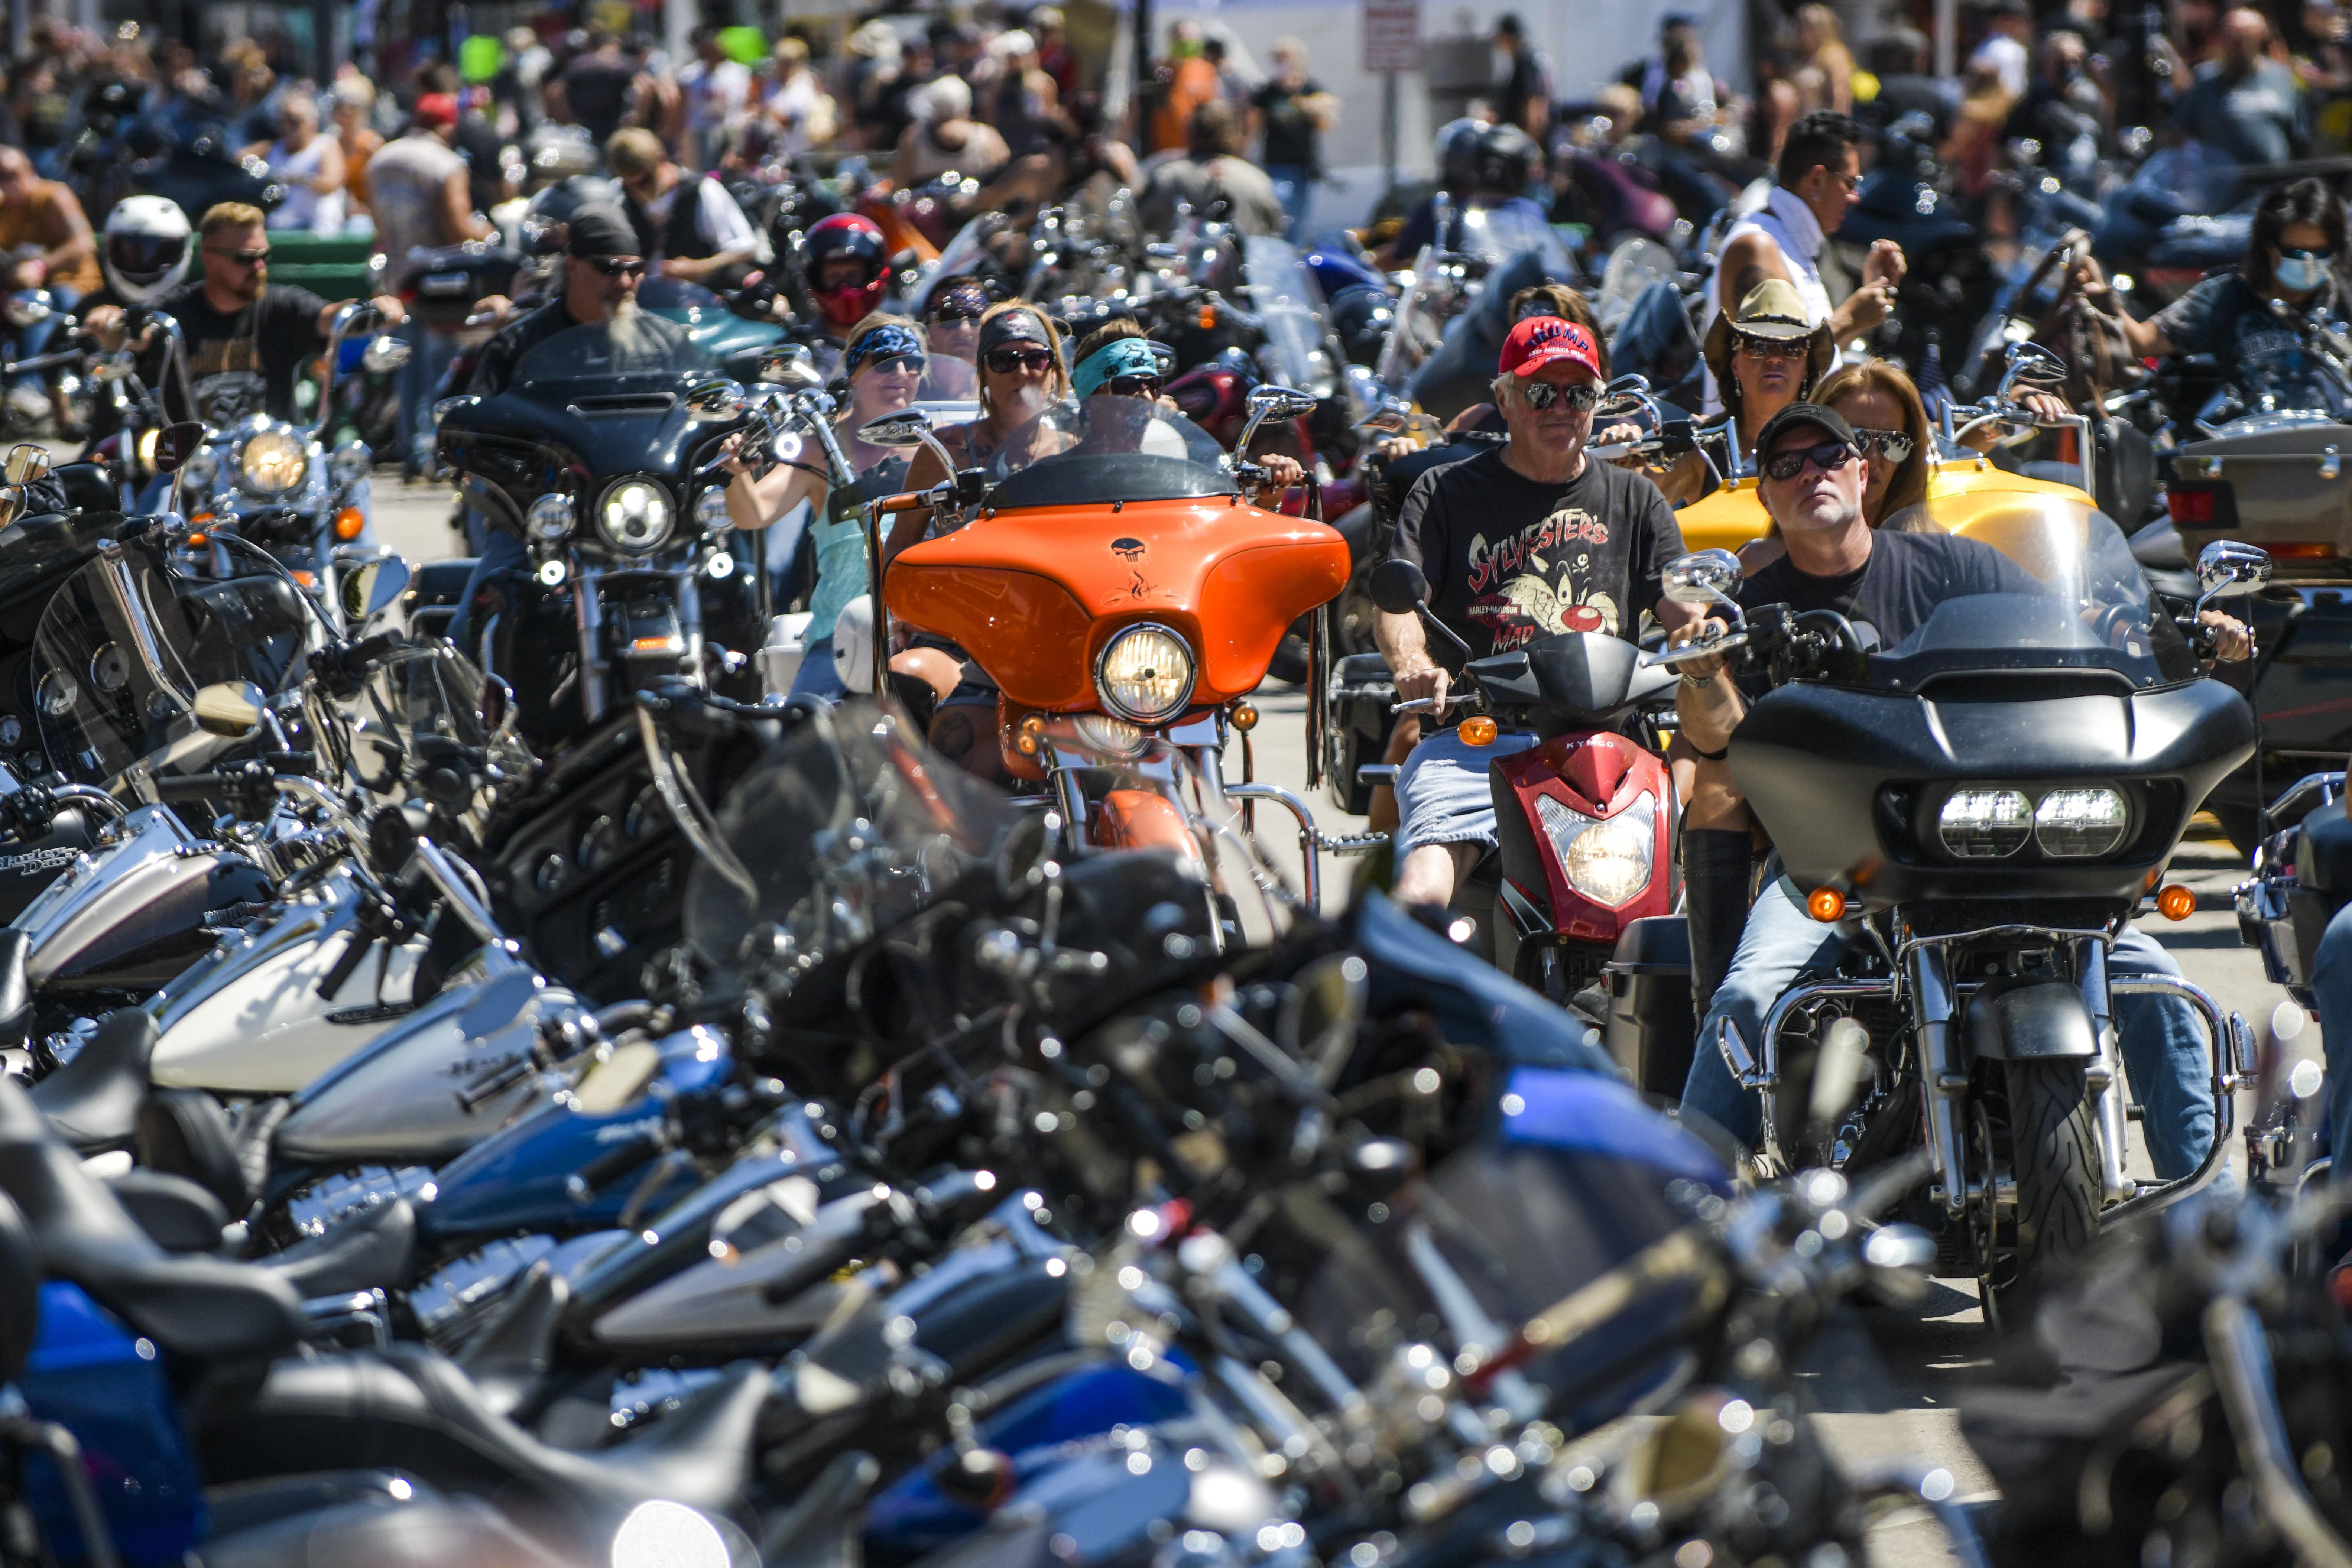 Sturgis Motorcycle Rally Attracts Thousands, With Few Masks And Little Social Distancing (Photos)